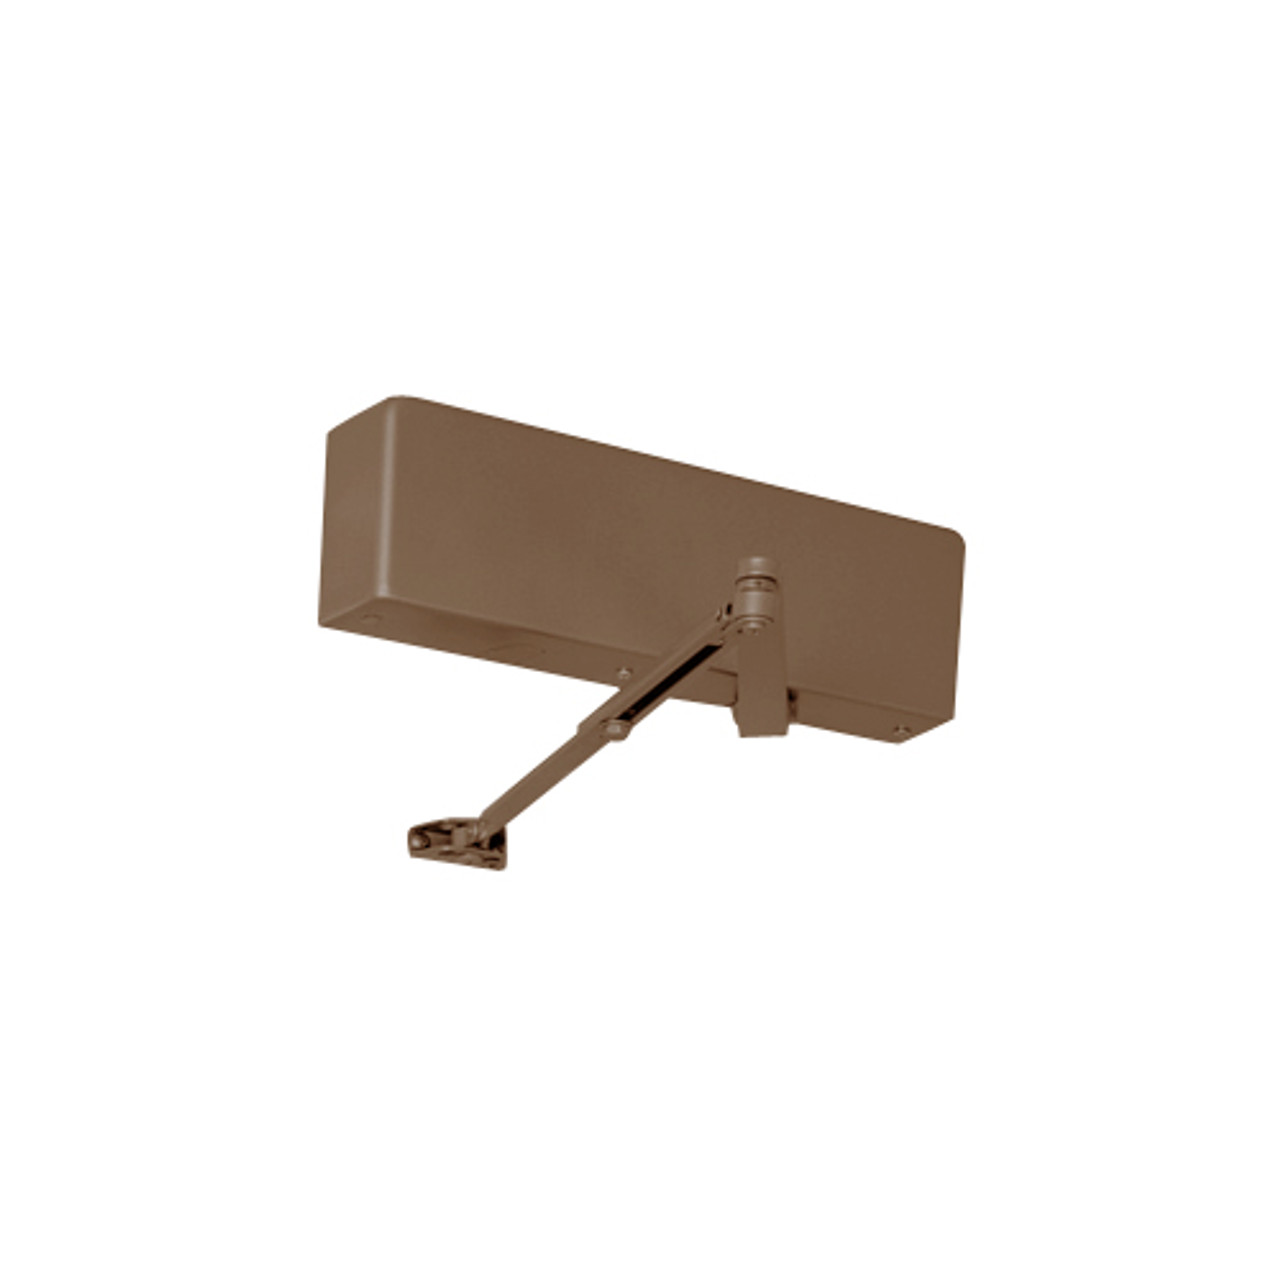 J7530DA-691 Norton 7500 Series Non-Hold Open Institutional Door Closer with Top Jamb Only Reveals 0 to 3 inch in Dull Bronze Finish